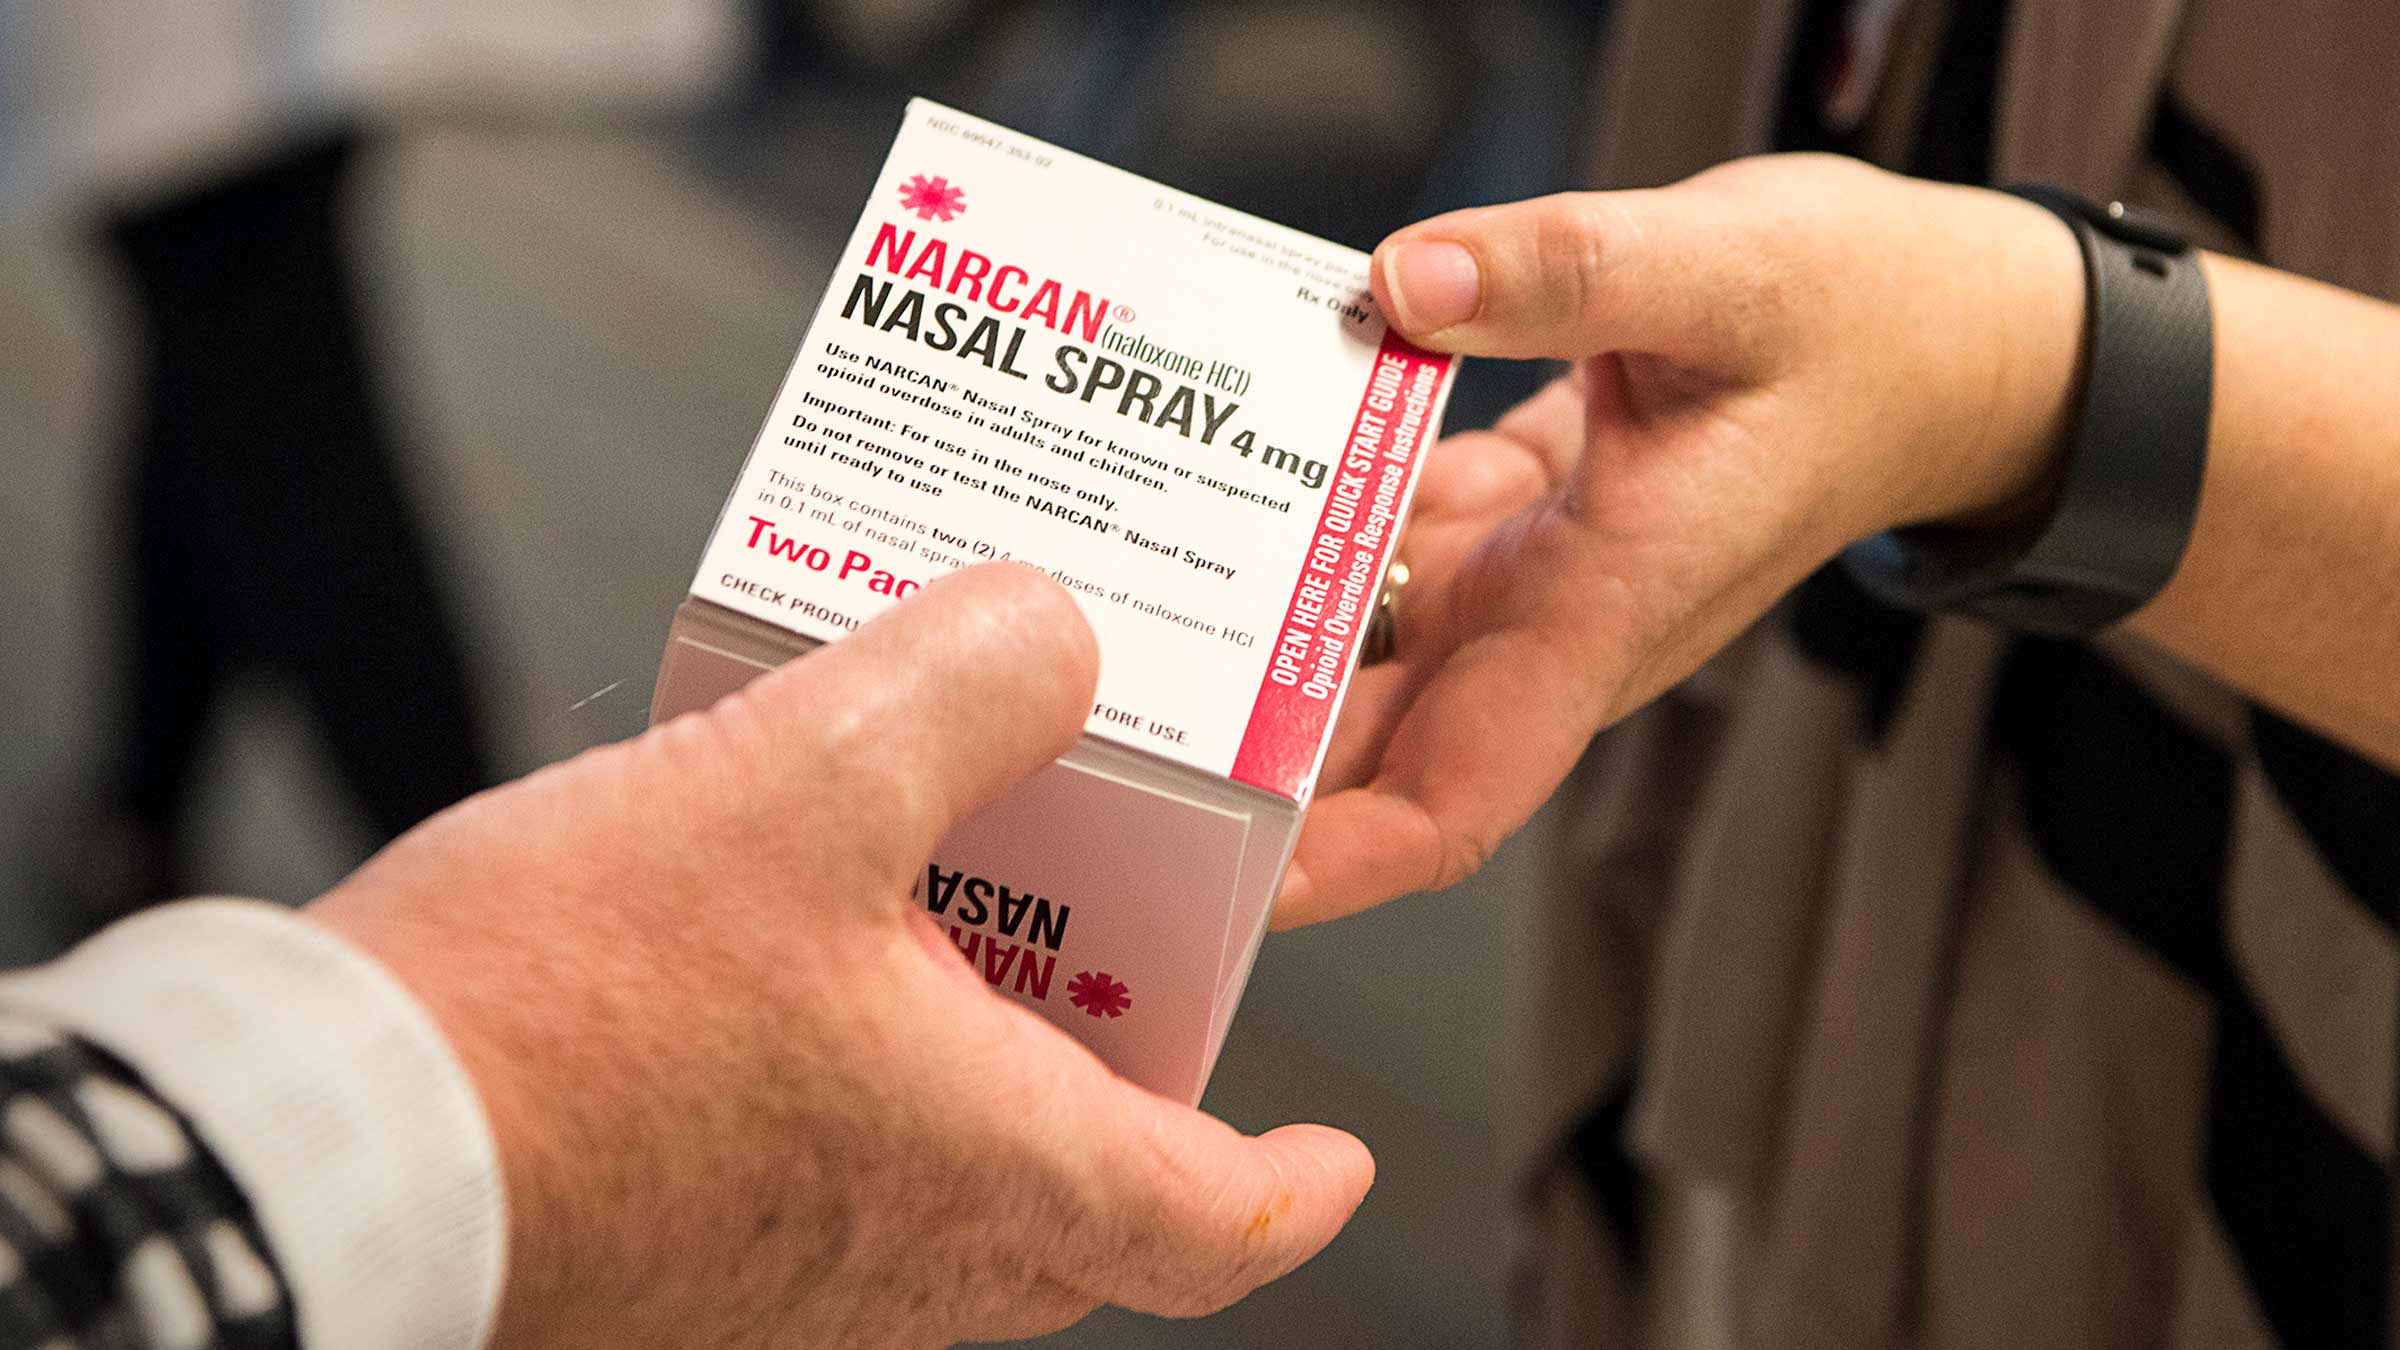 Person handing out a package containing Narcan